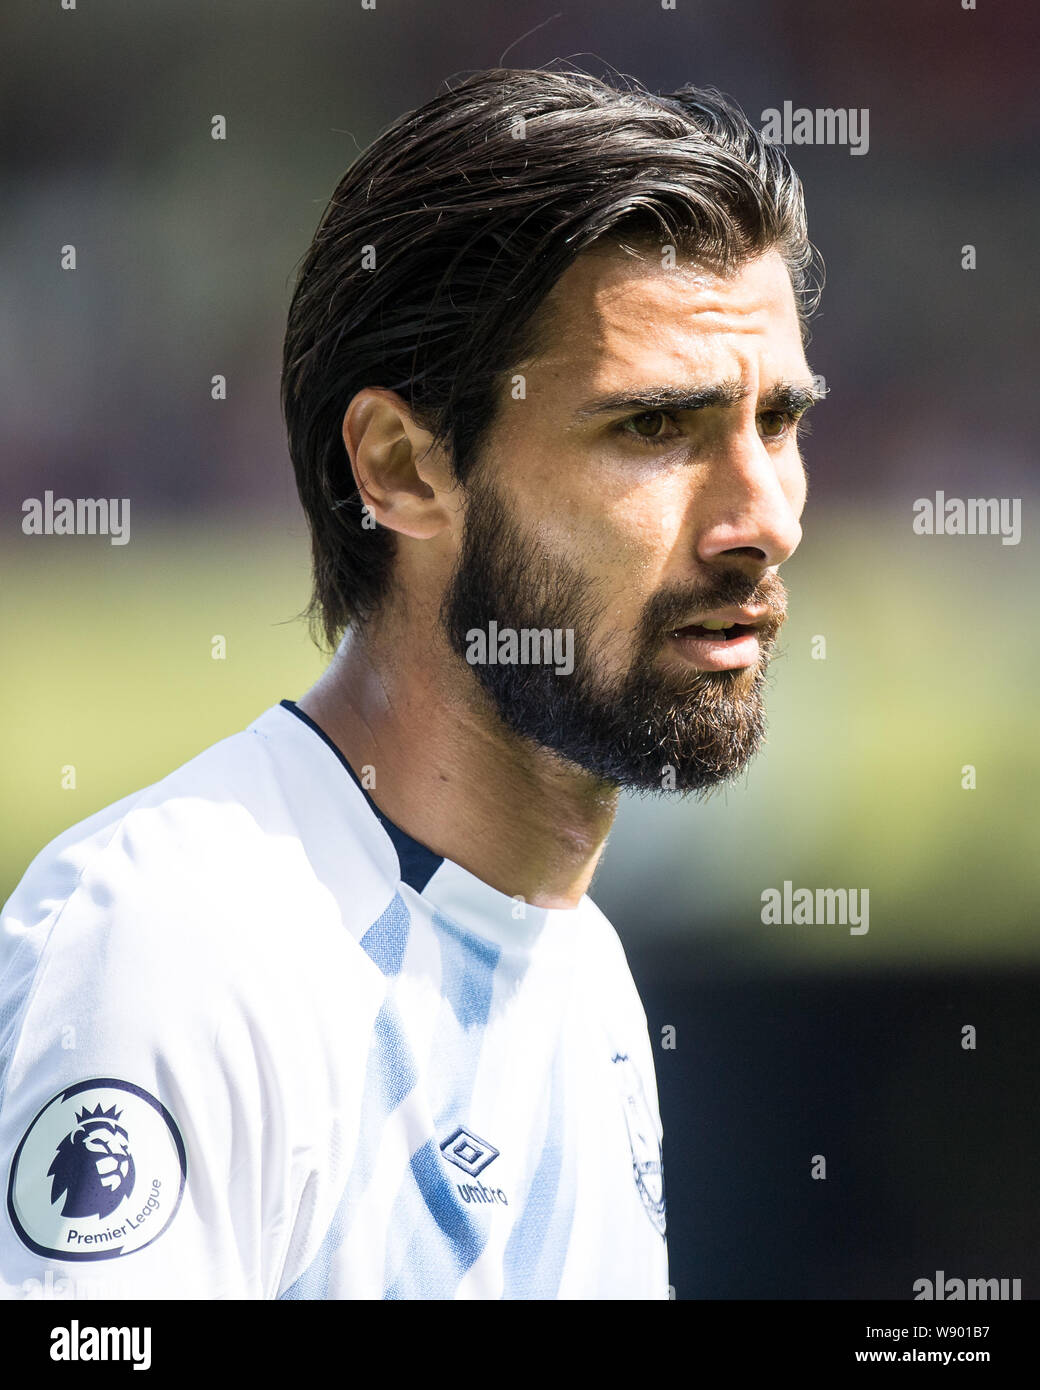 LONDON, ENGLAND - AUGUST 10: Andre Gomes of Everton FC looks on during the  Premier League match between Crystal Palace and Everton FC at Selhurst Park  on August 10, 2019 in London,